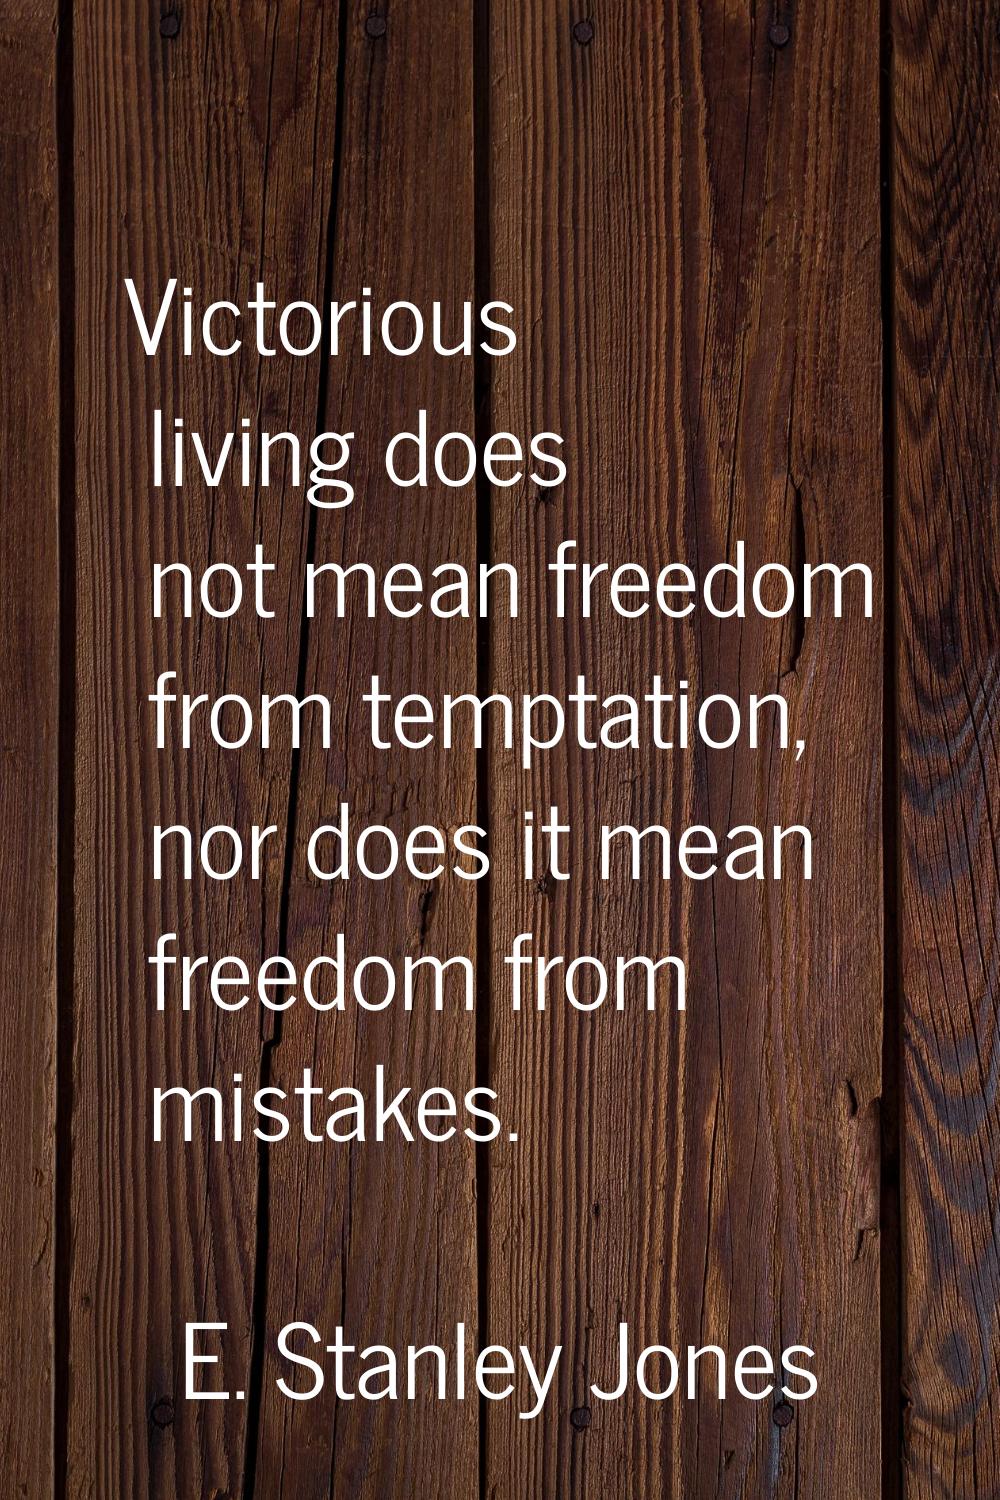 Victorious living does not mean freedom from temptation, nor does it mean freedom from mistakes.